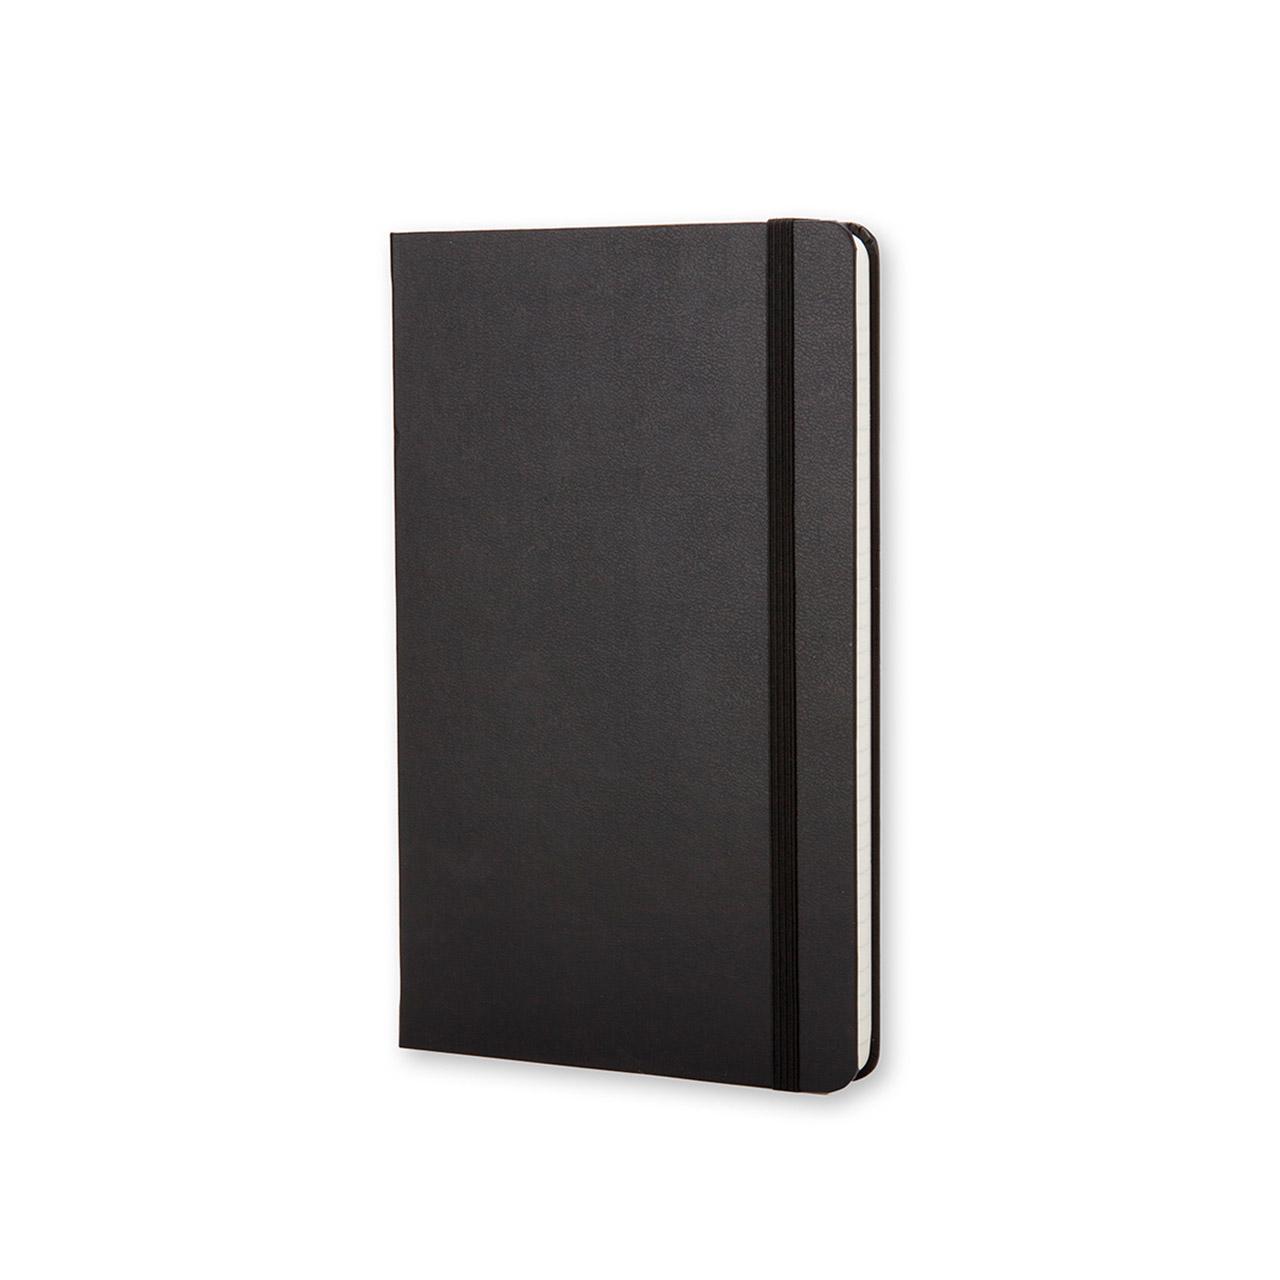 Classic Large Hard Cover Notebook Black